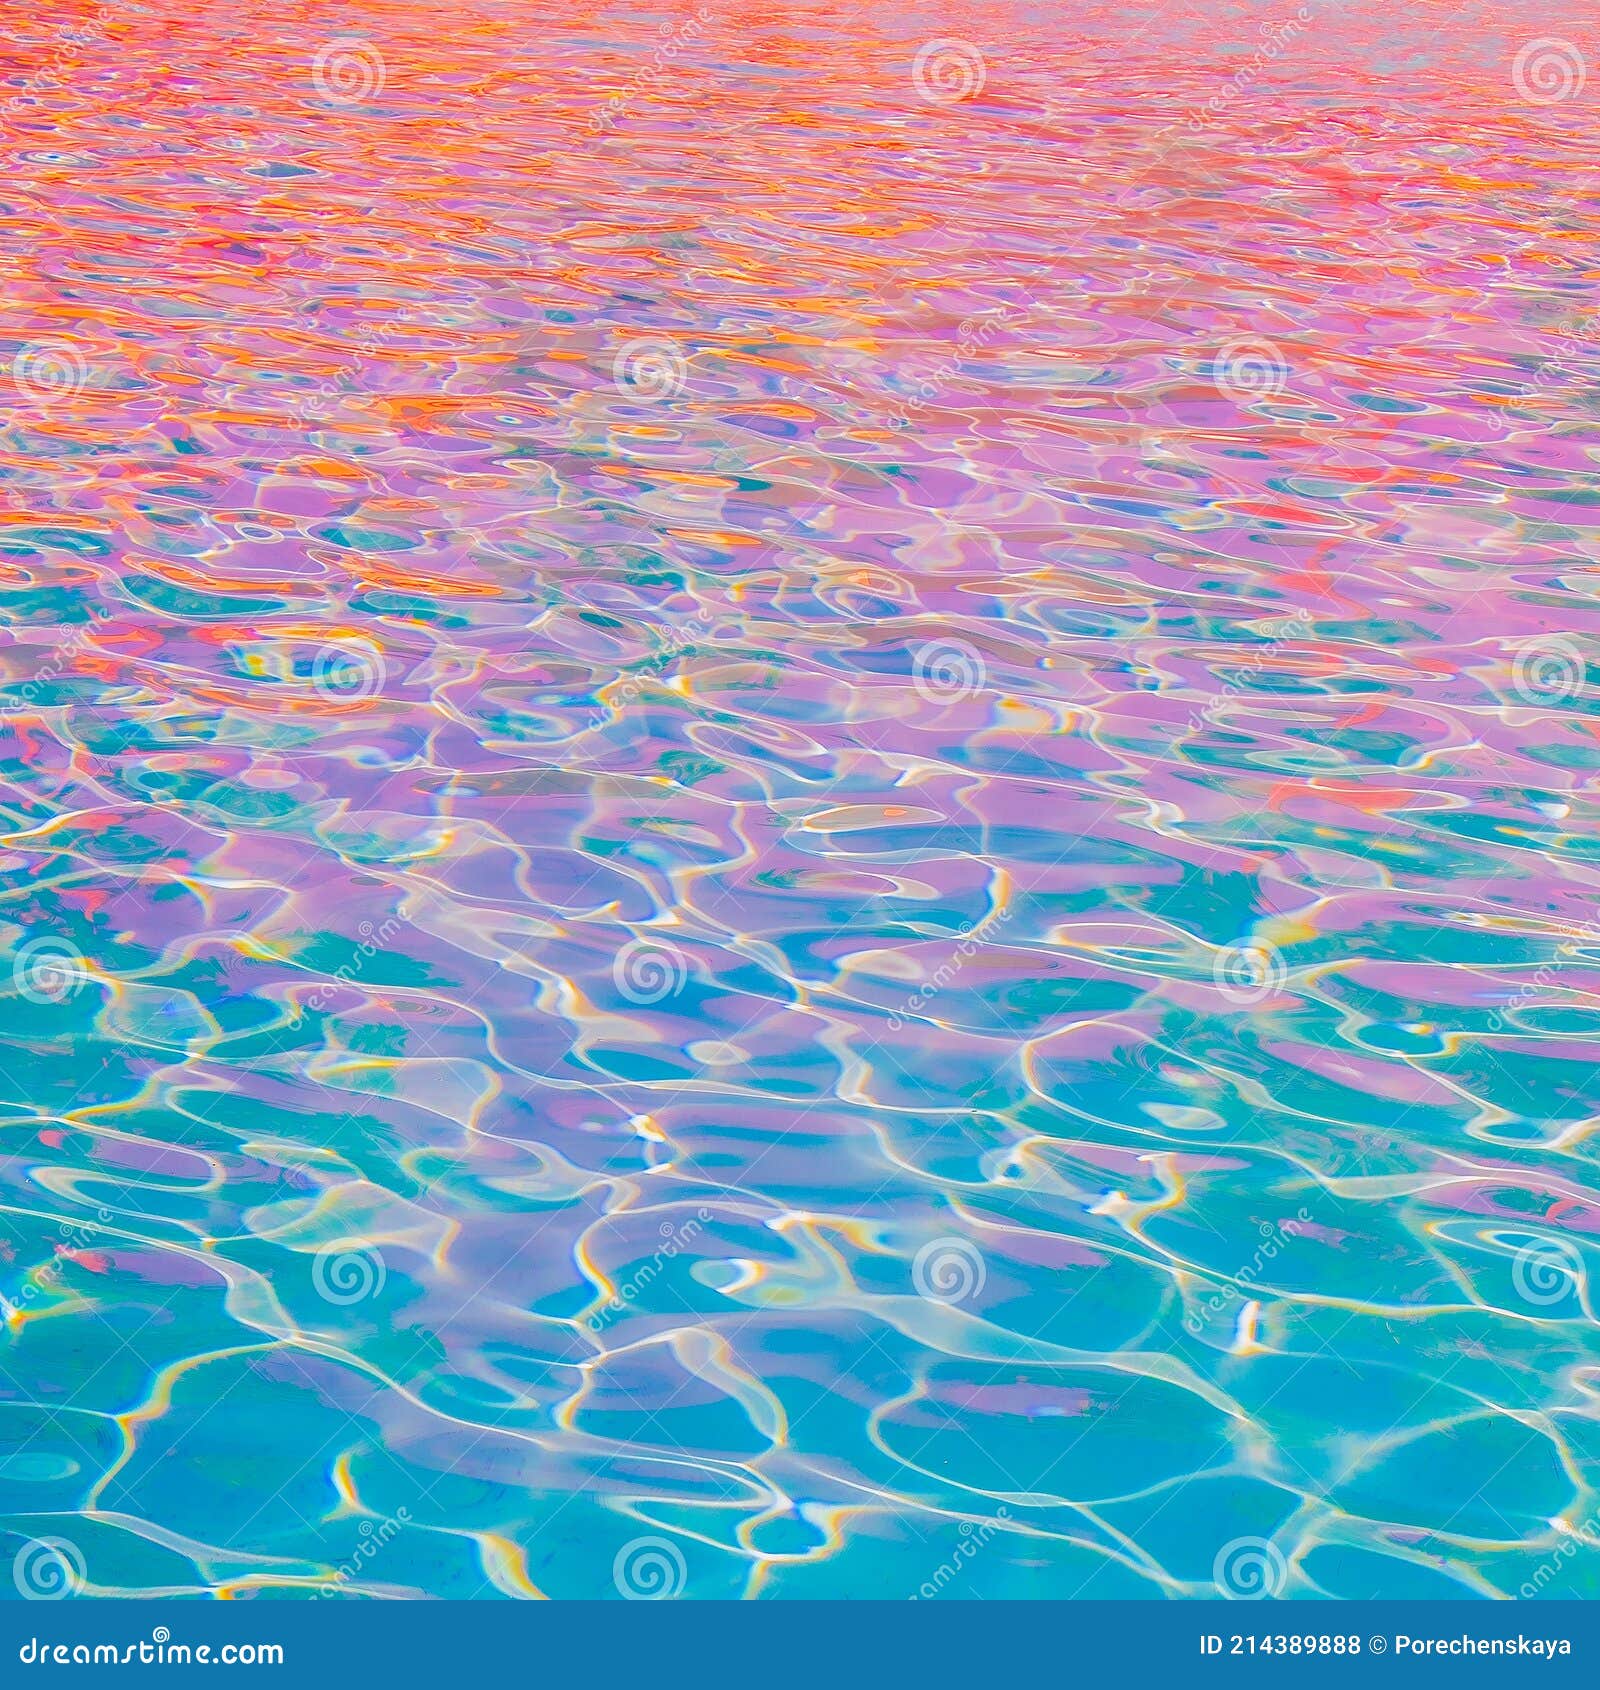 https://thumbs.dreamstime.com/z/minimalist-wallpaper-blue-pink-vaporwave-swimming-pool-relax-water-vacation-dreams-time-concept-214389888.jpg